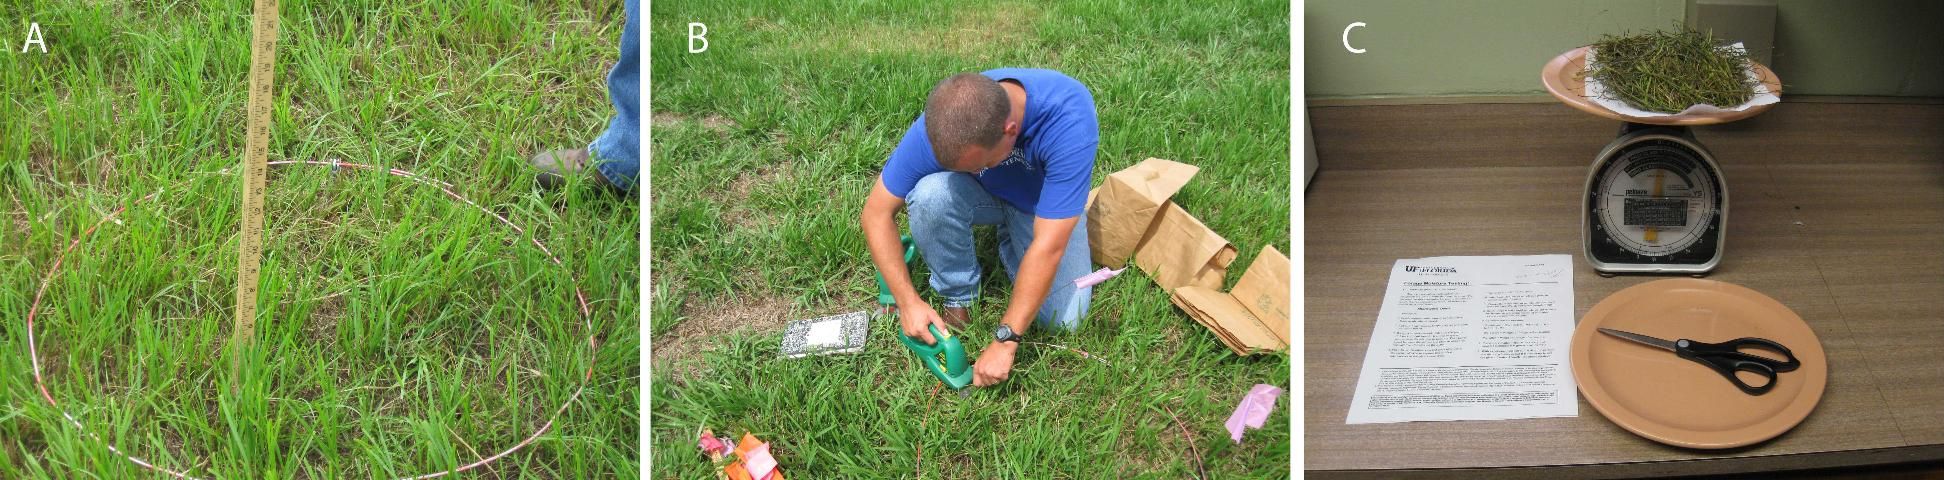 Figure 1. A) Measurement of forage height; B) Collection of field sample; C) Weighing dried samples.